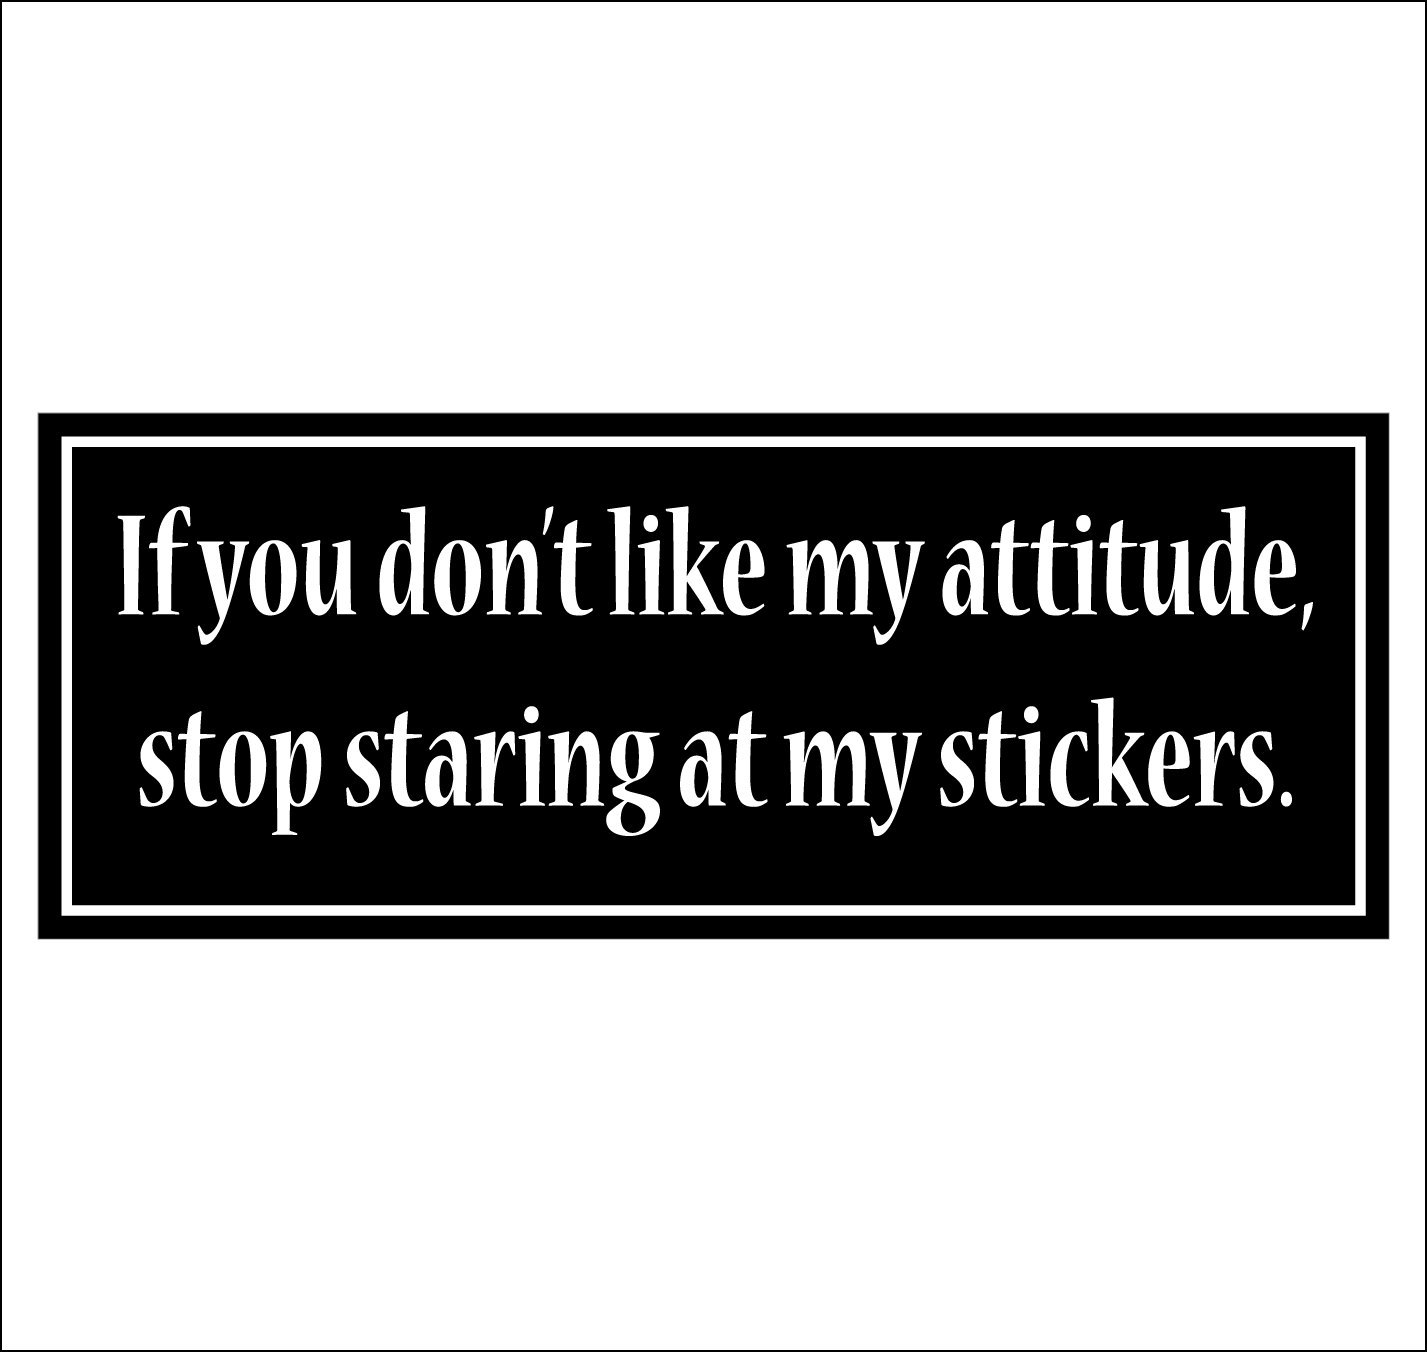 Primary image for If you don't like my attitude, stop staring at my stickers. - bumper sticker